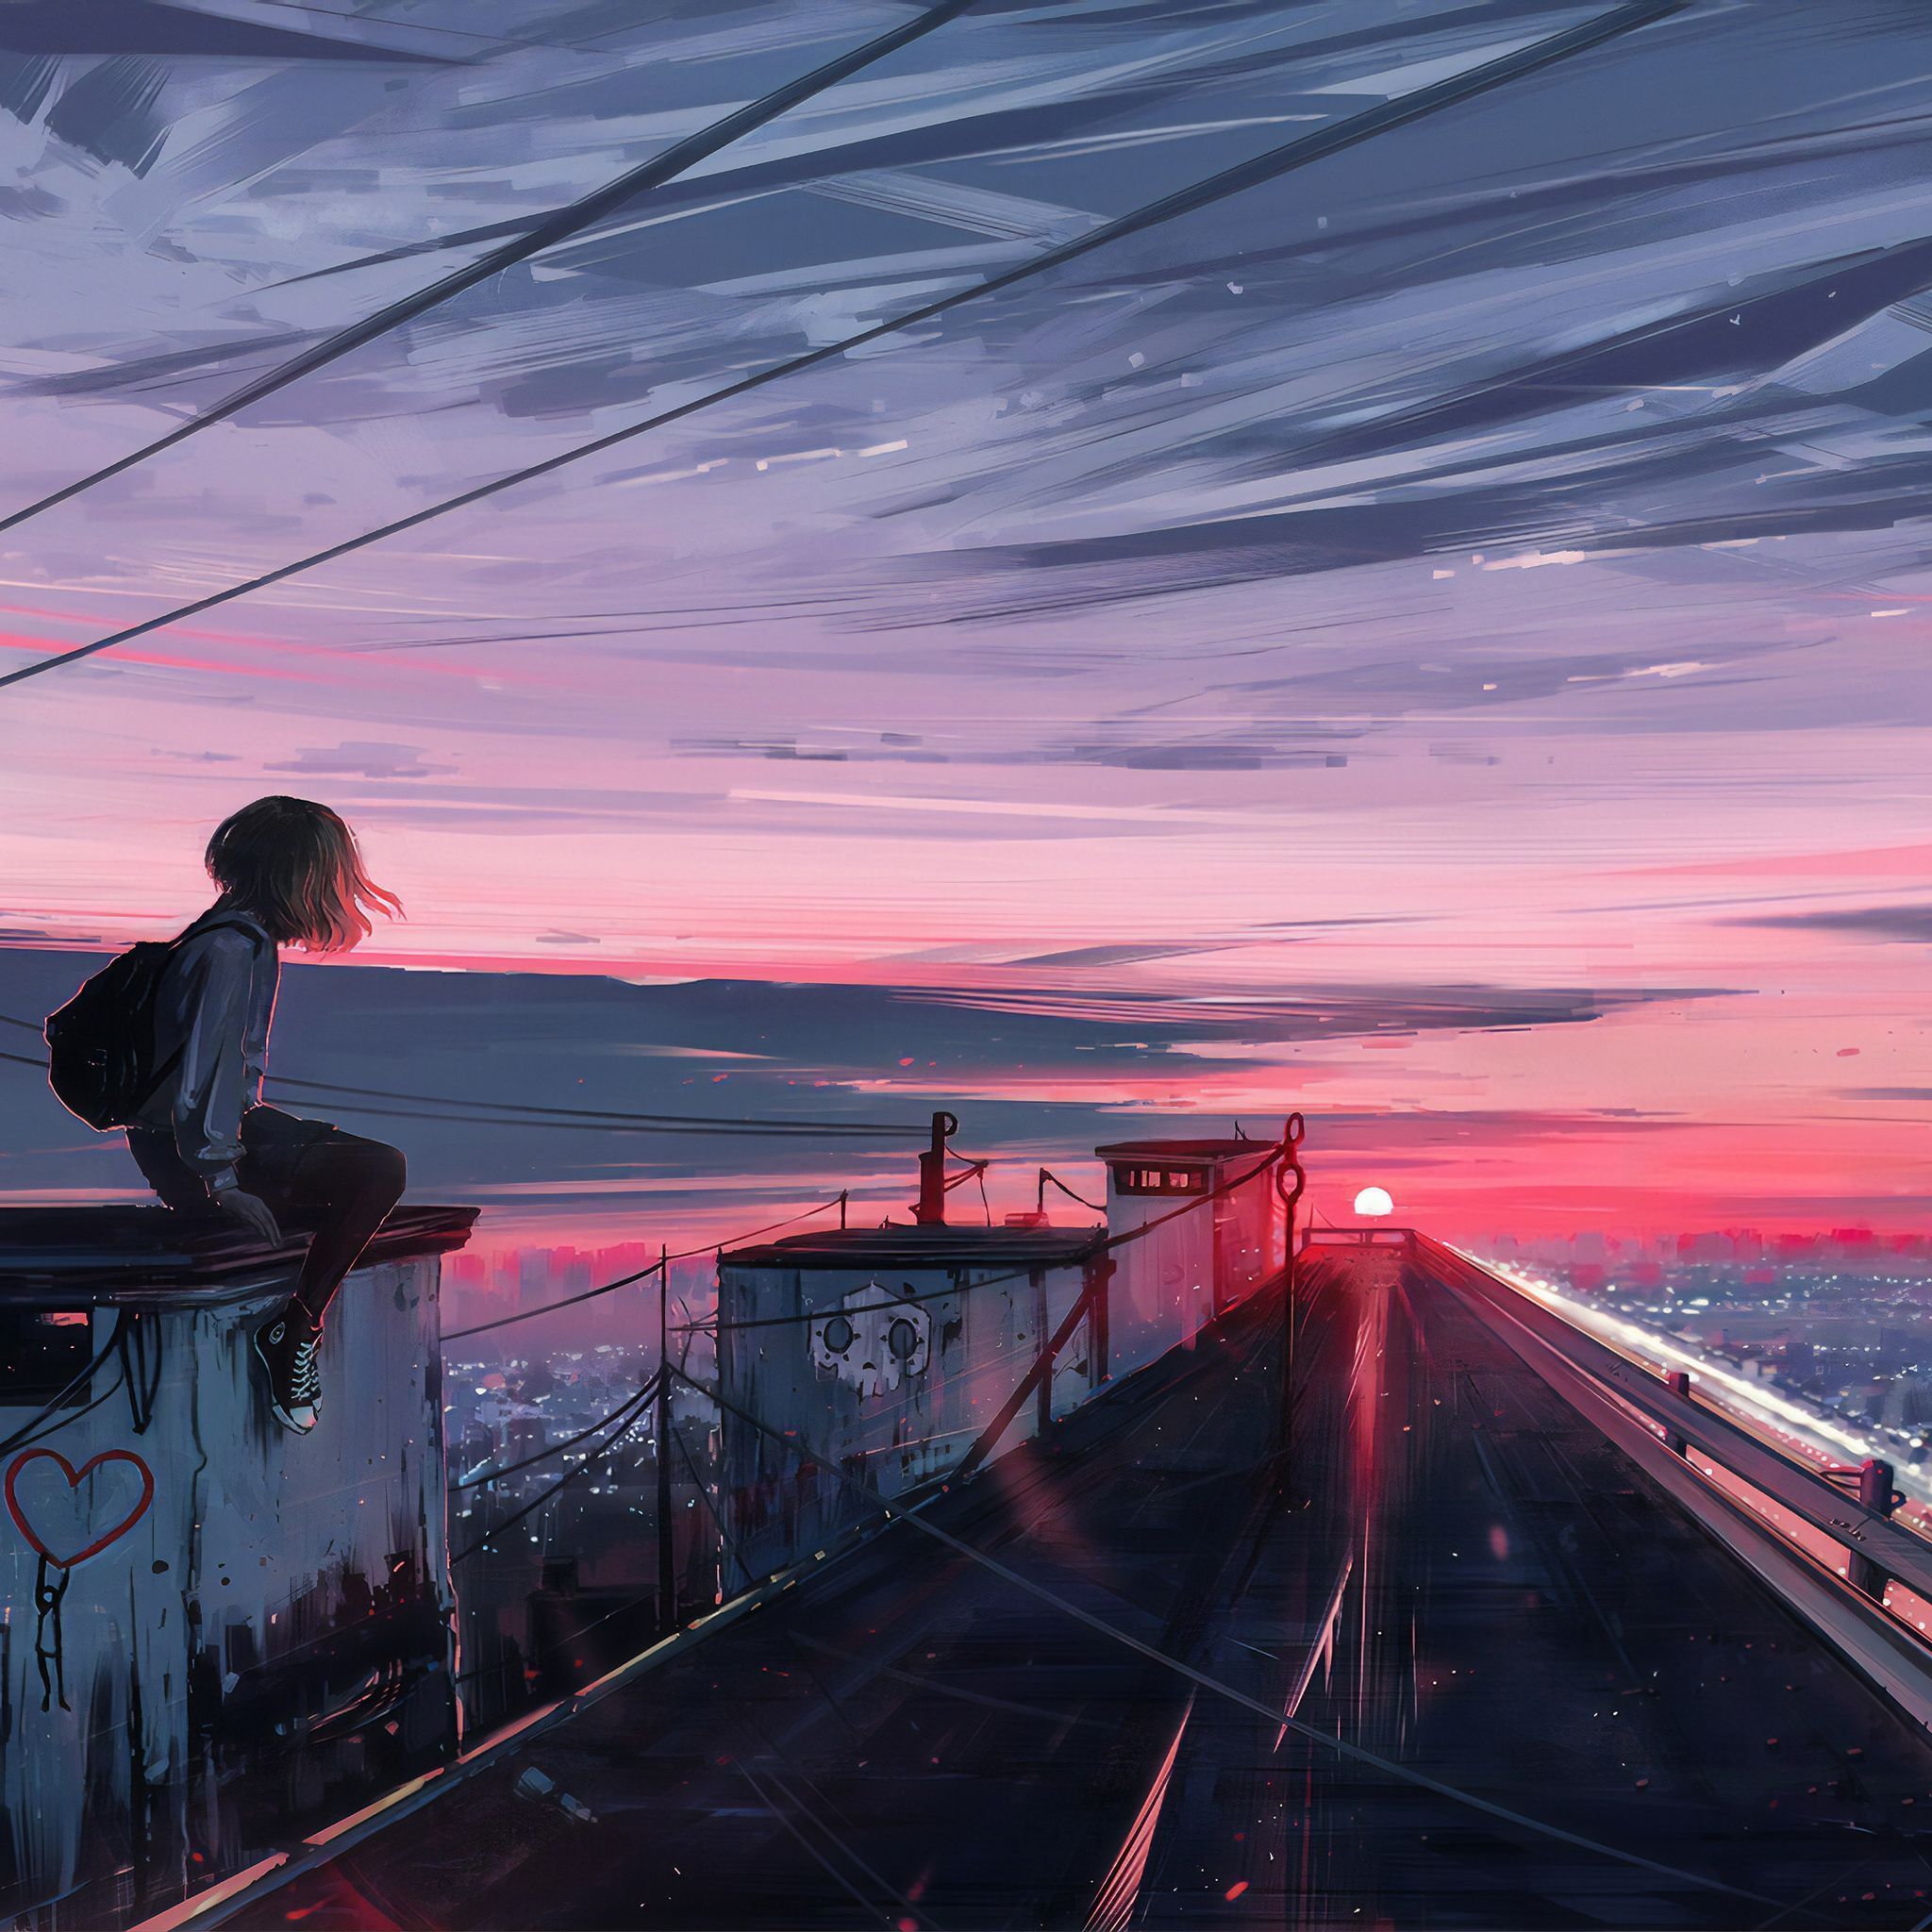 Aesthetic anime girl sitting on the edge of the roof watching the sunset - Anime sunset